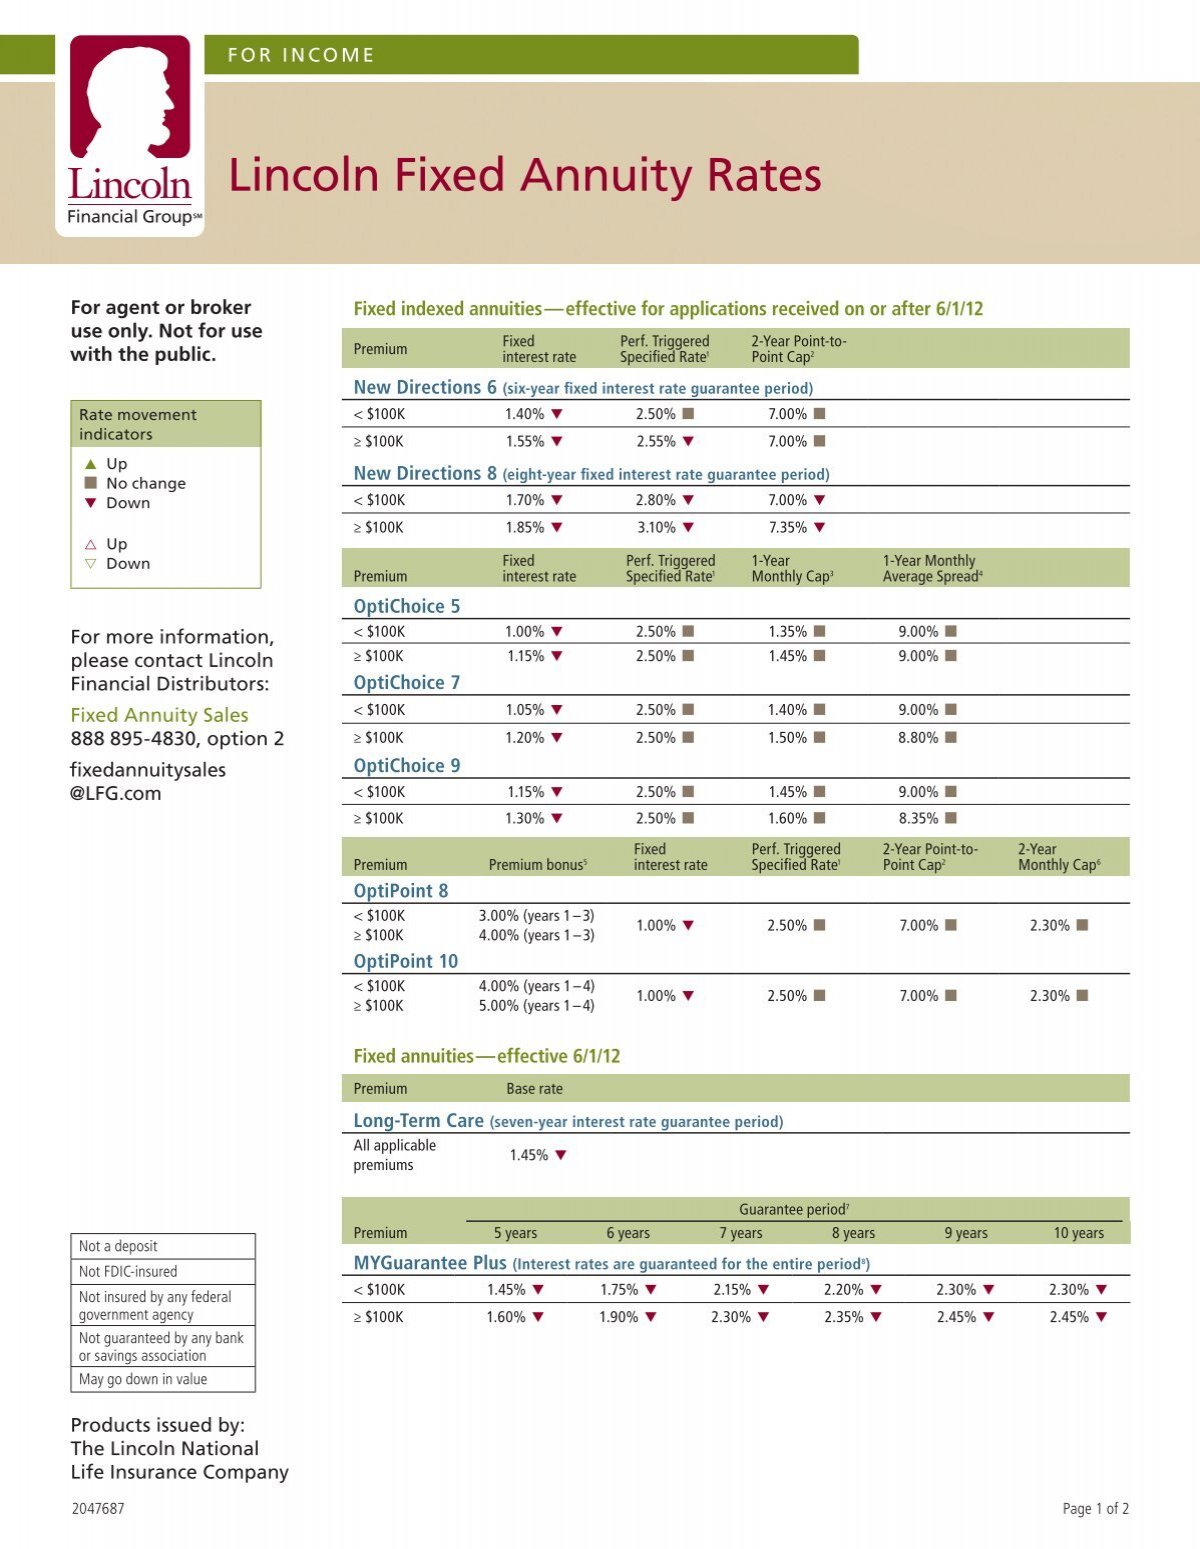 lincoln-fixed-annuity-rates-eca-marketing